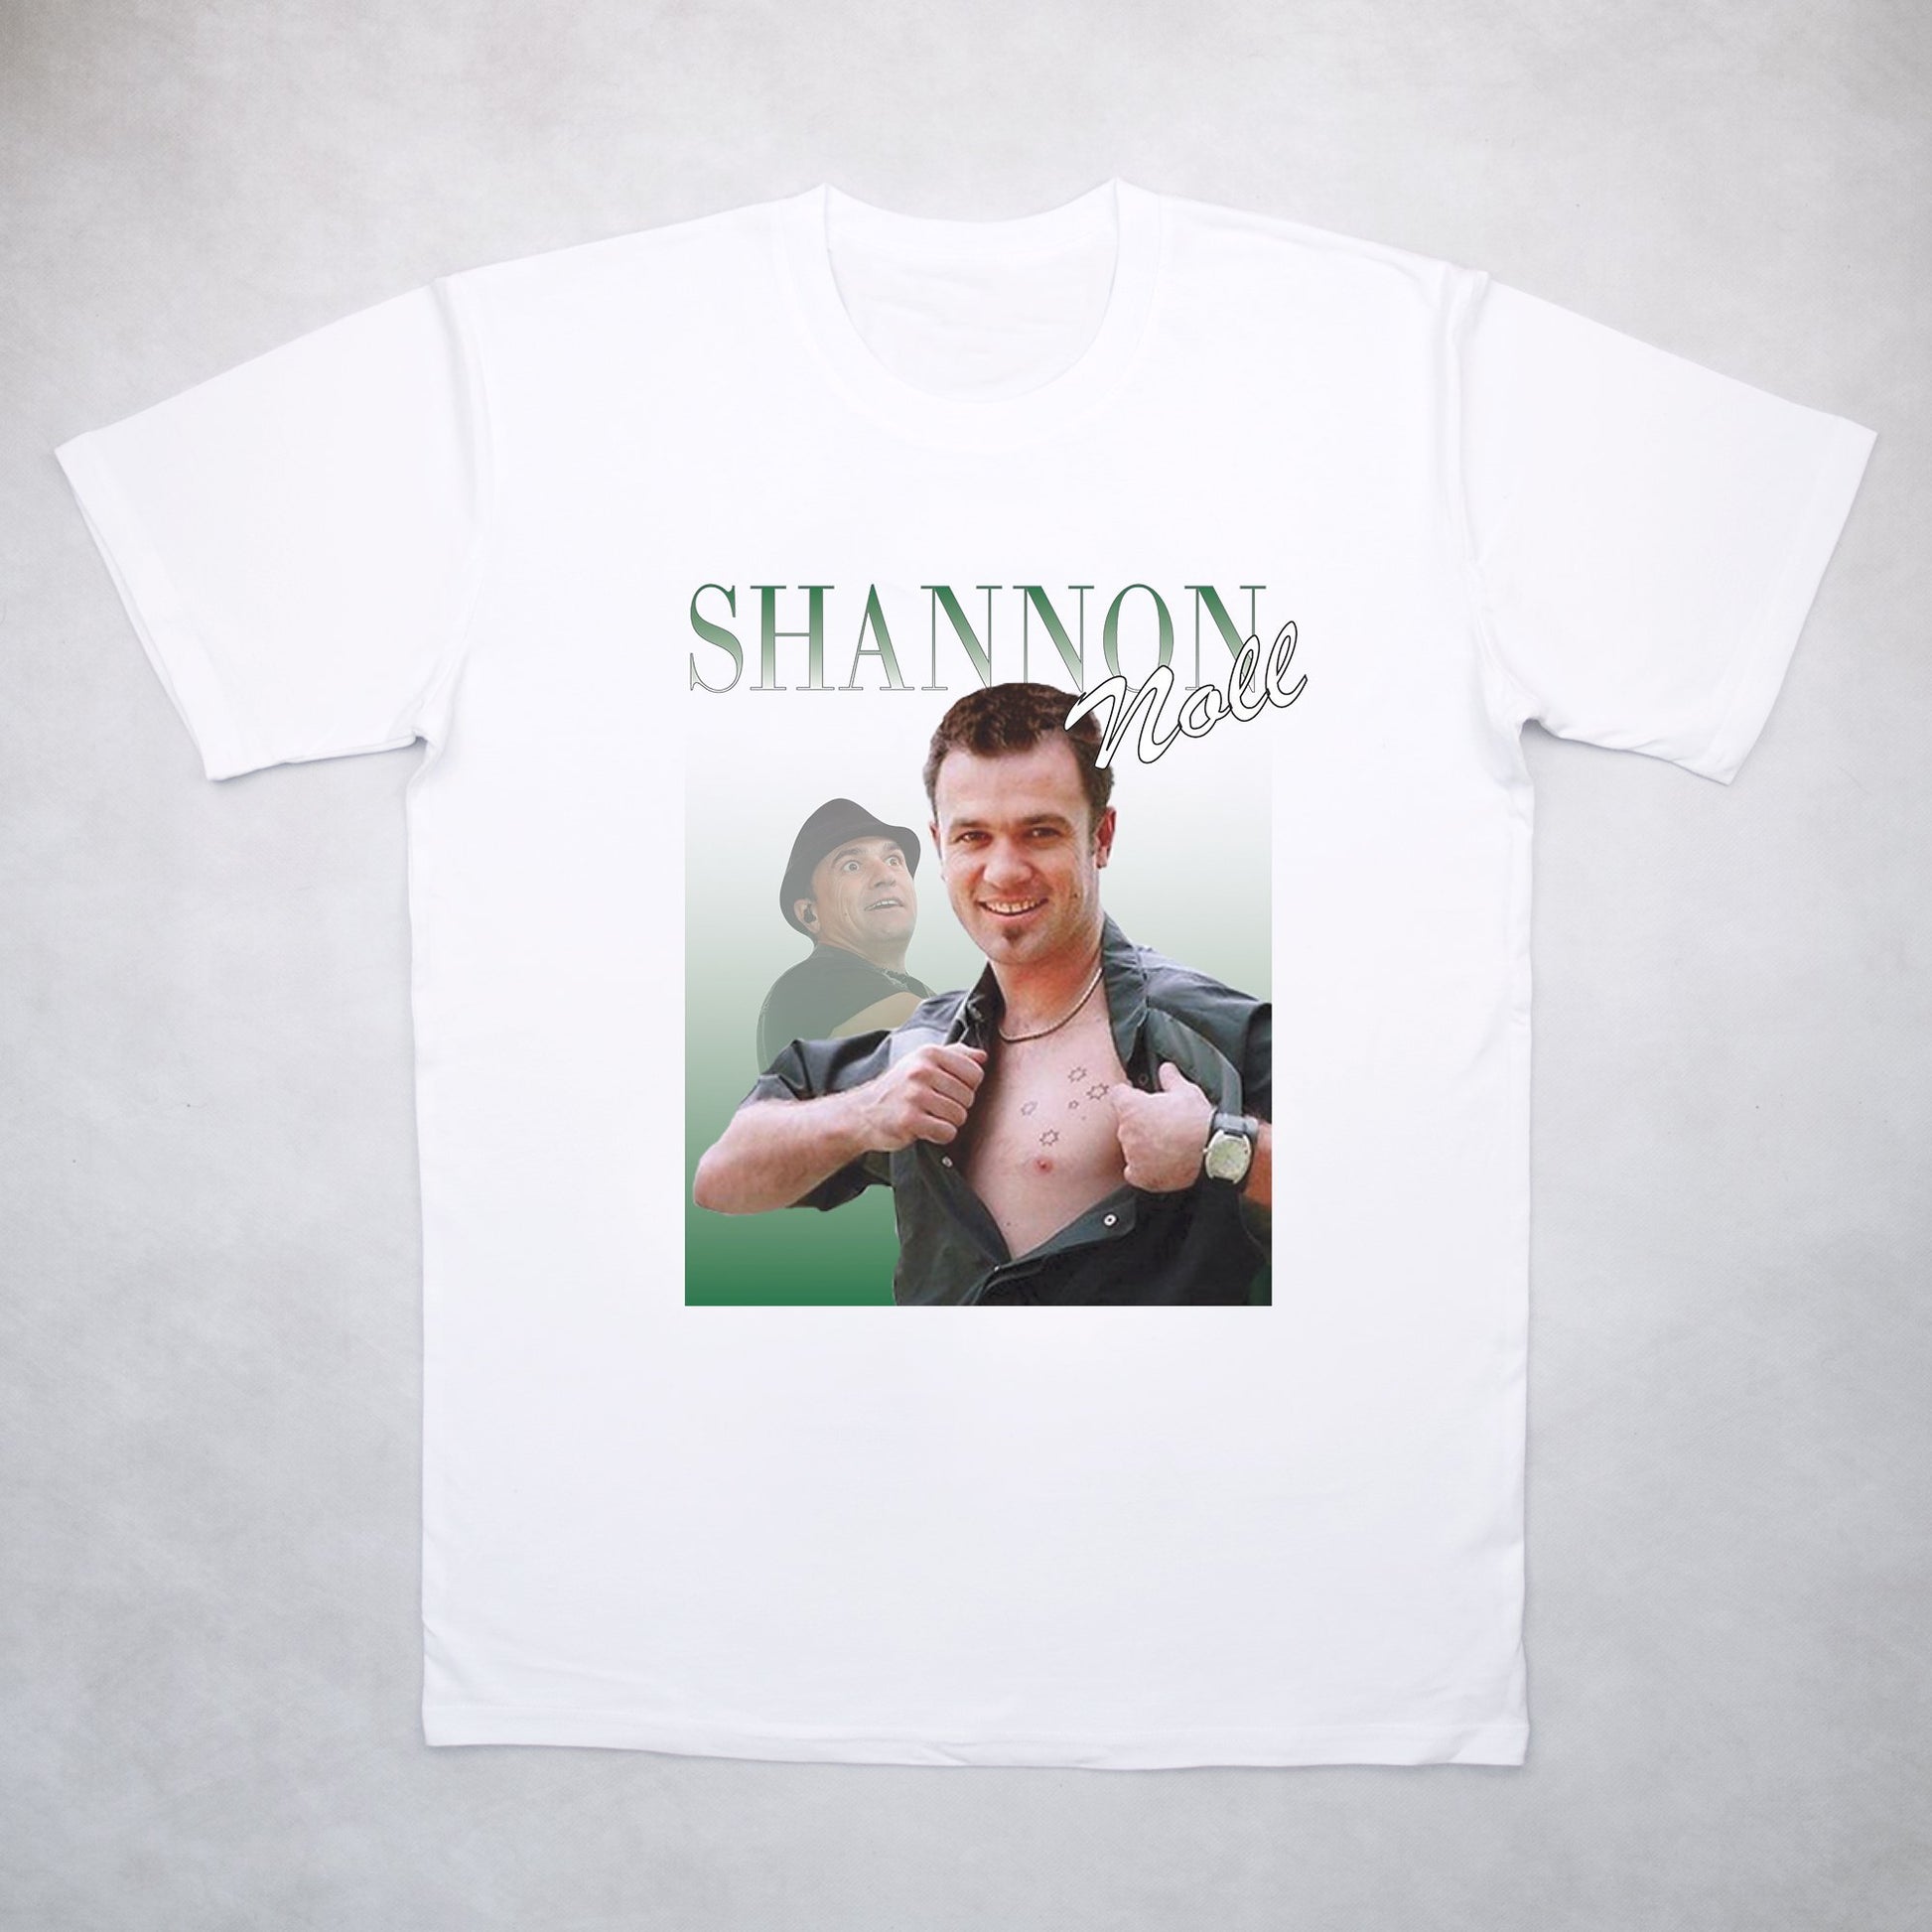 Classy Duds Short Sleeve T-Shirts Shannon Noll Commemorative Classic Tee